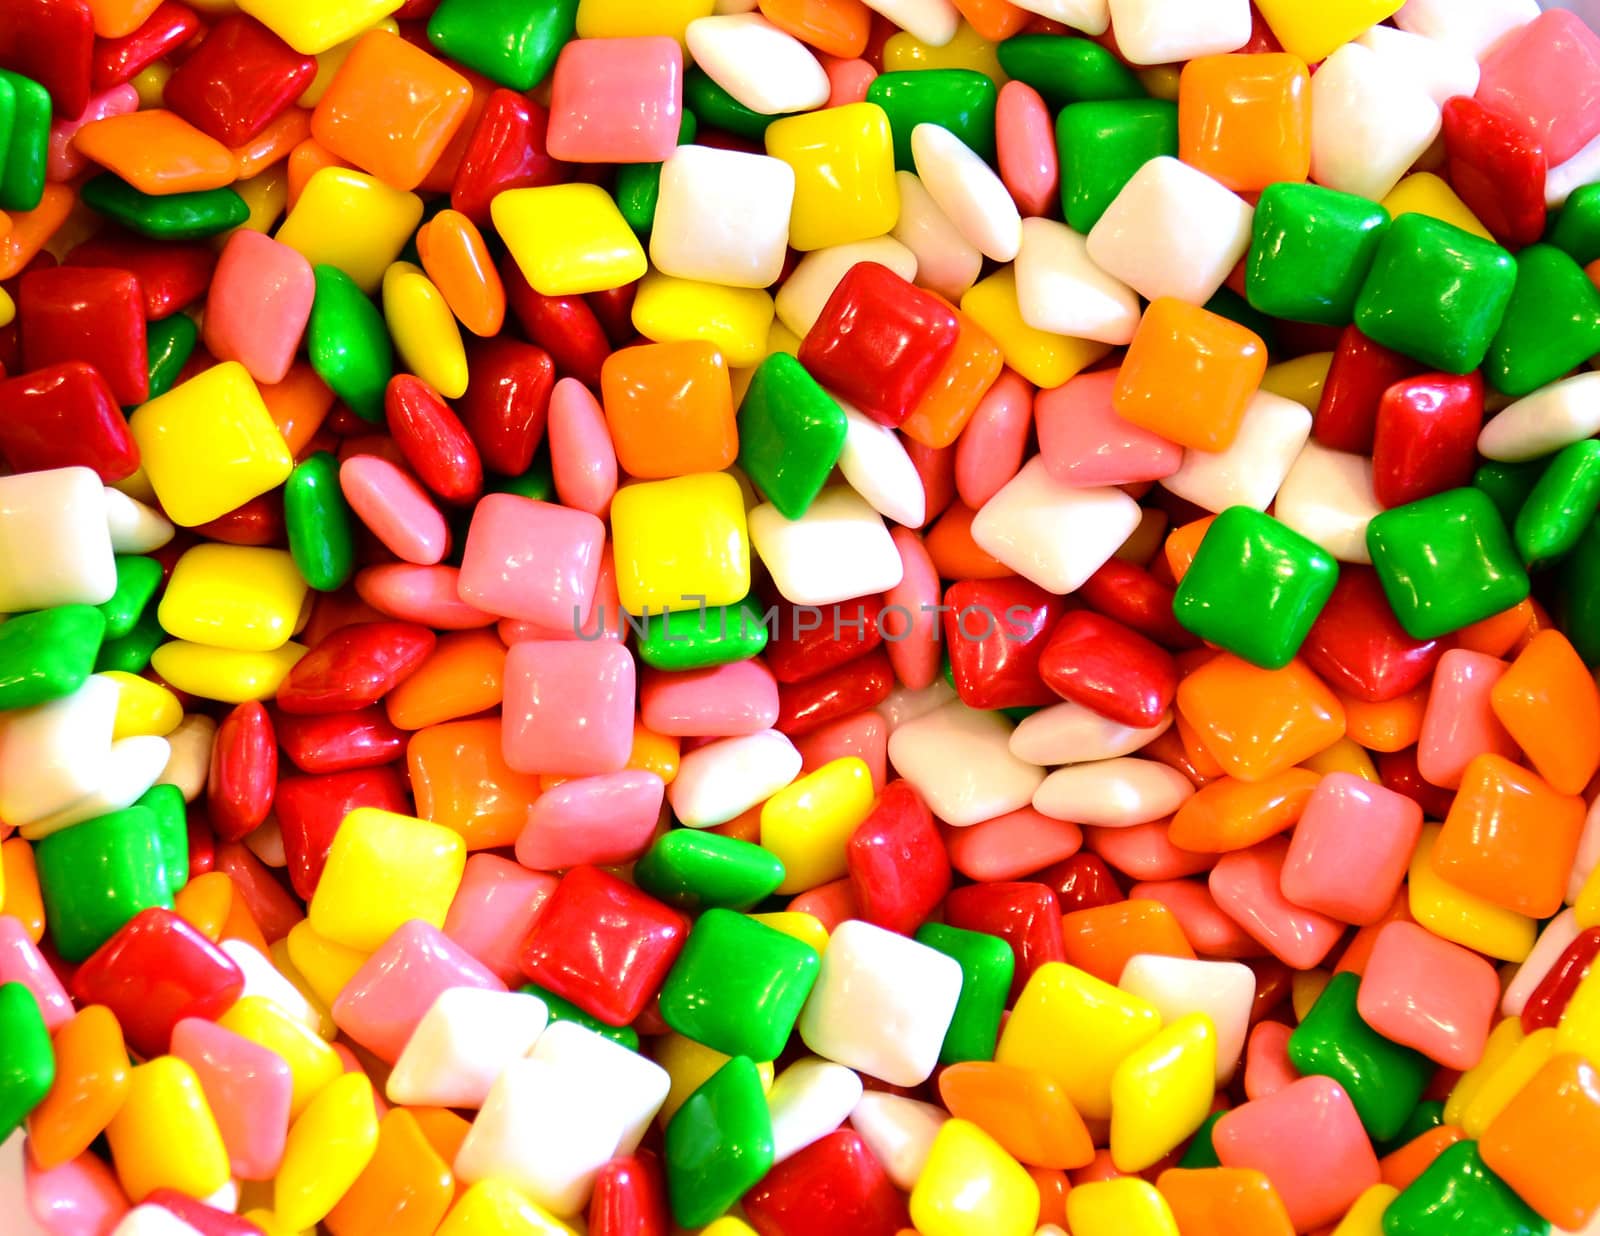 square gum or candy background by ftlaudgirl